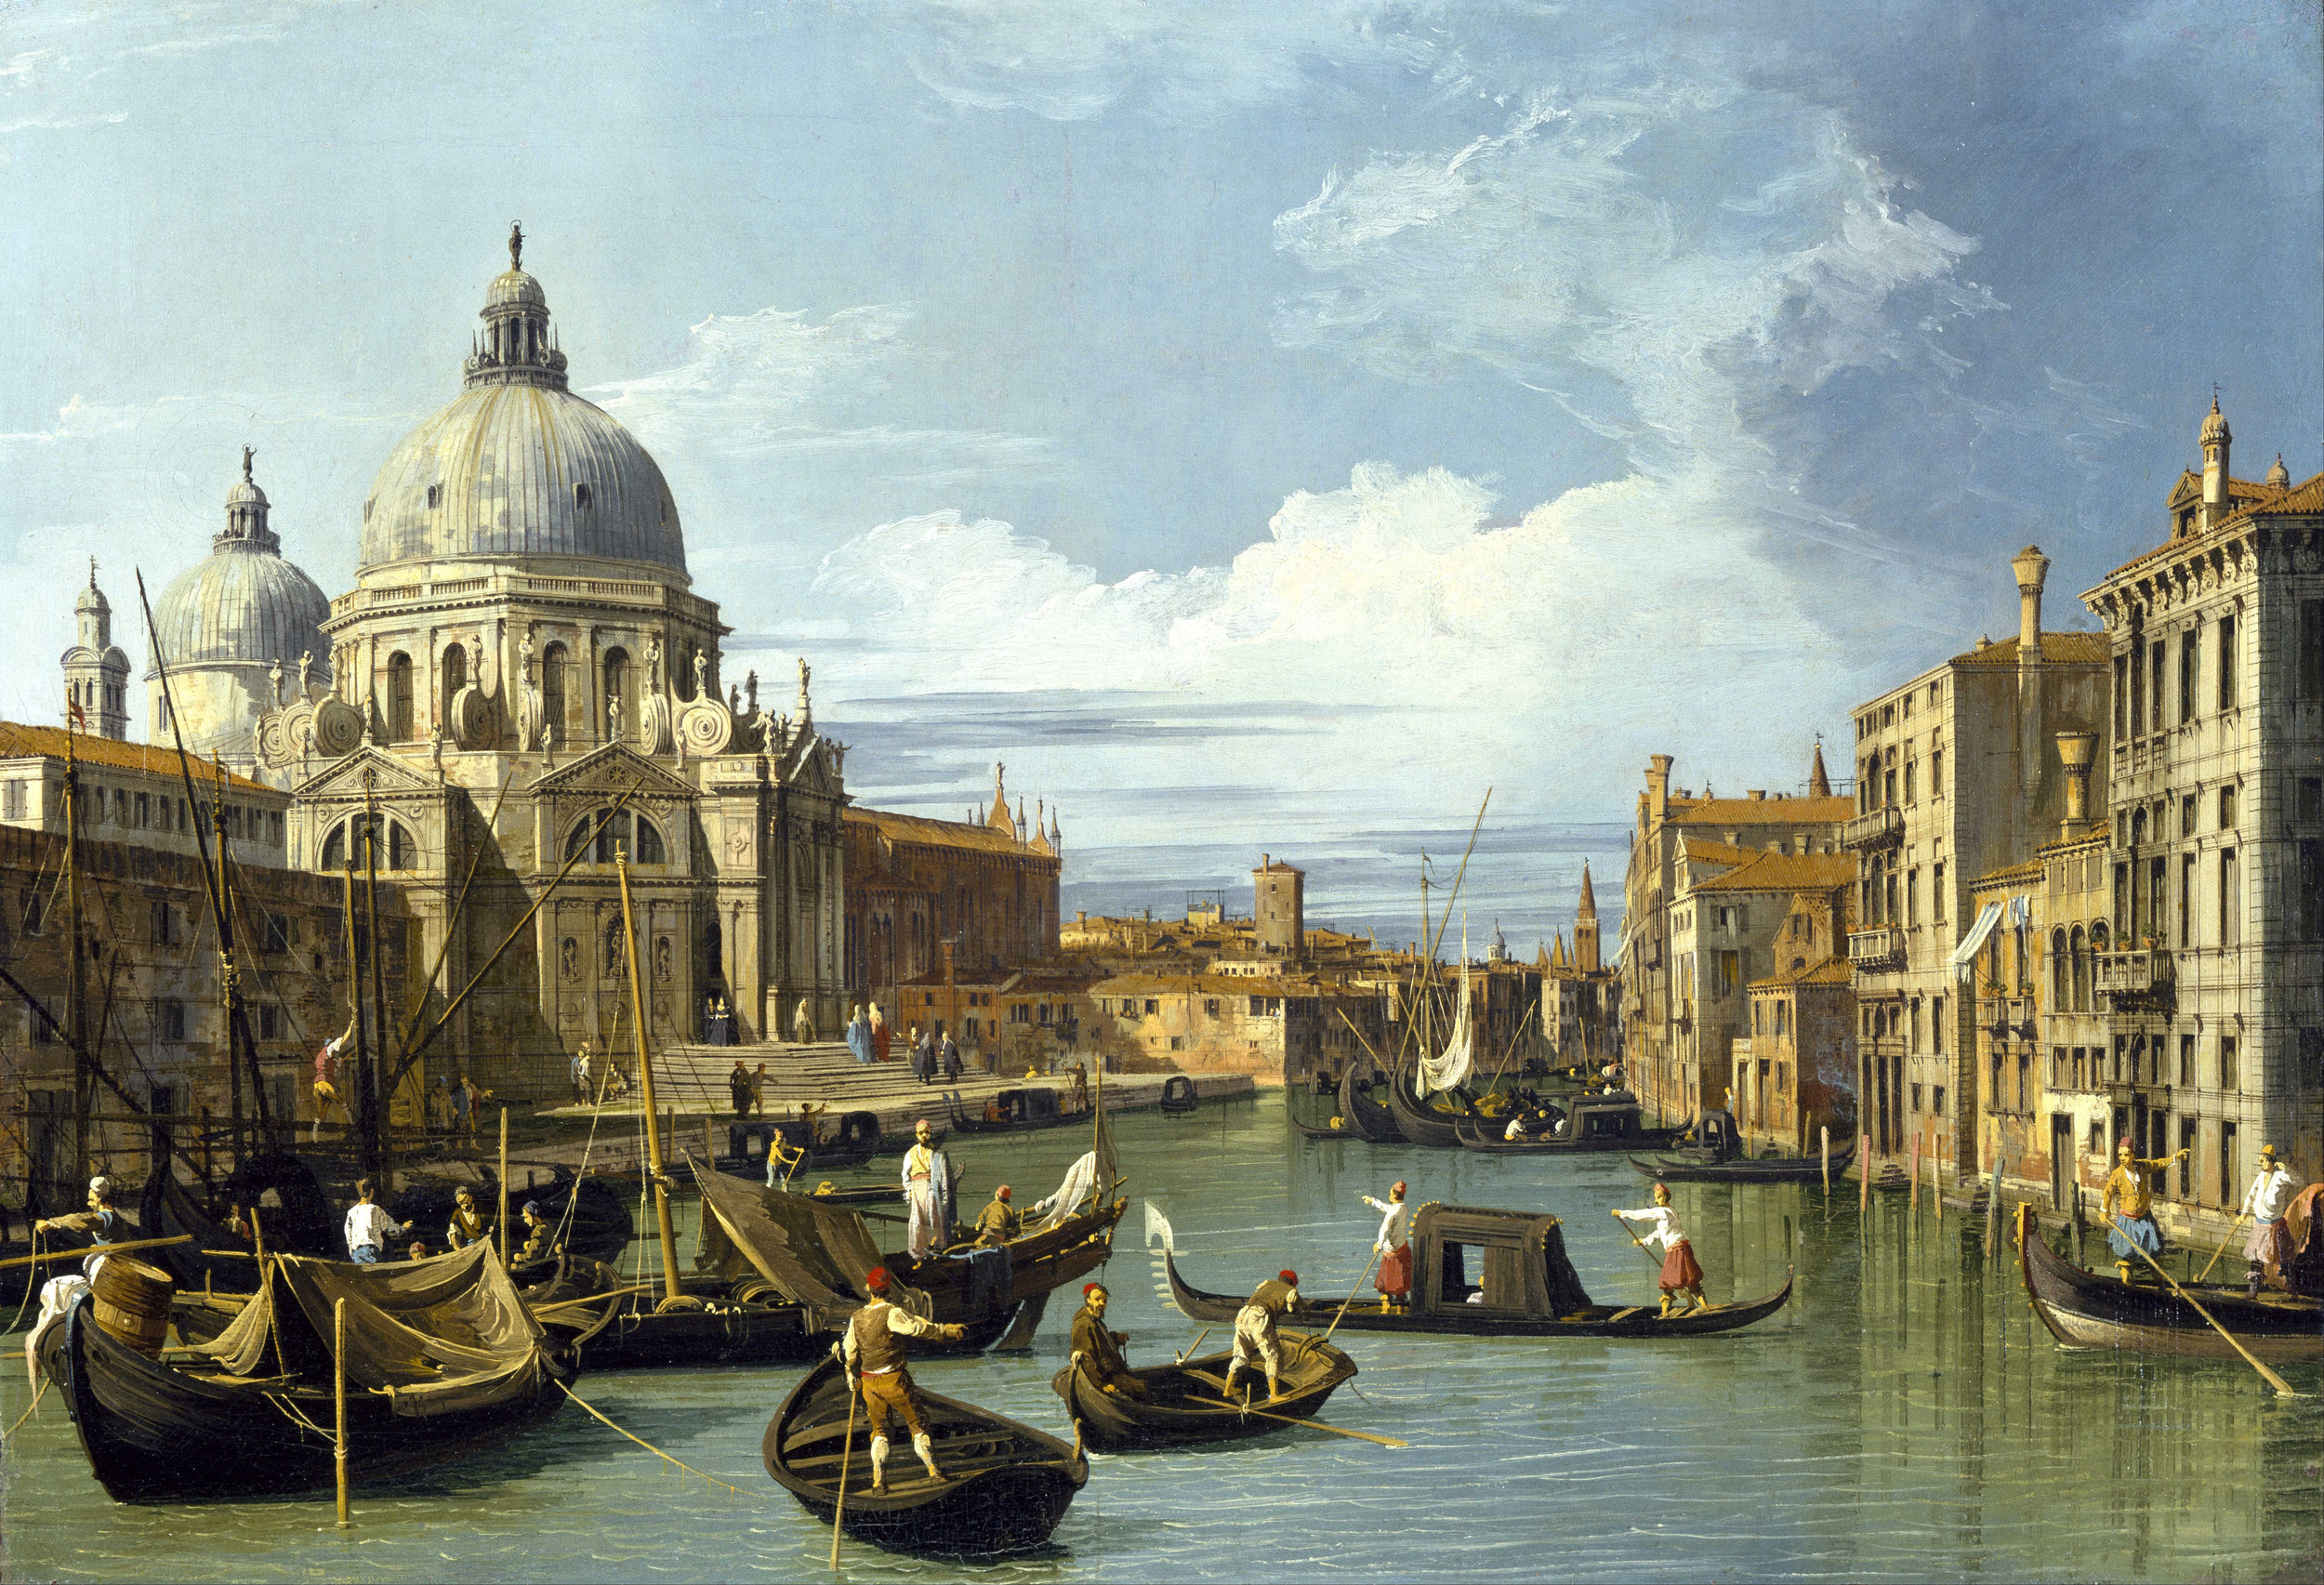   Canaletto  The entrance to the Grand Canal, 1730  Image: © Museum of Fine Arts, Houston 